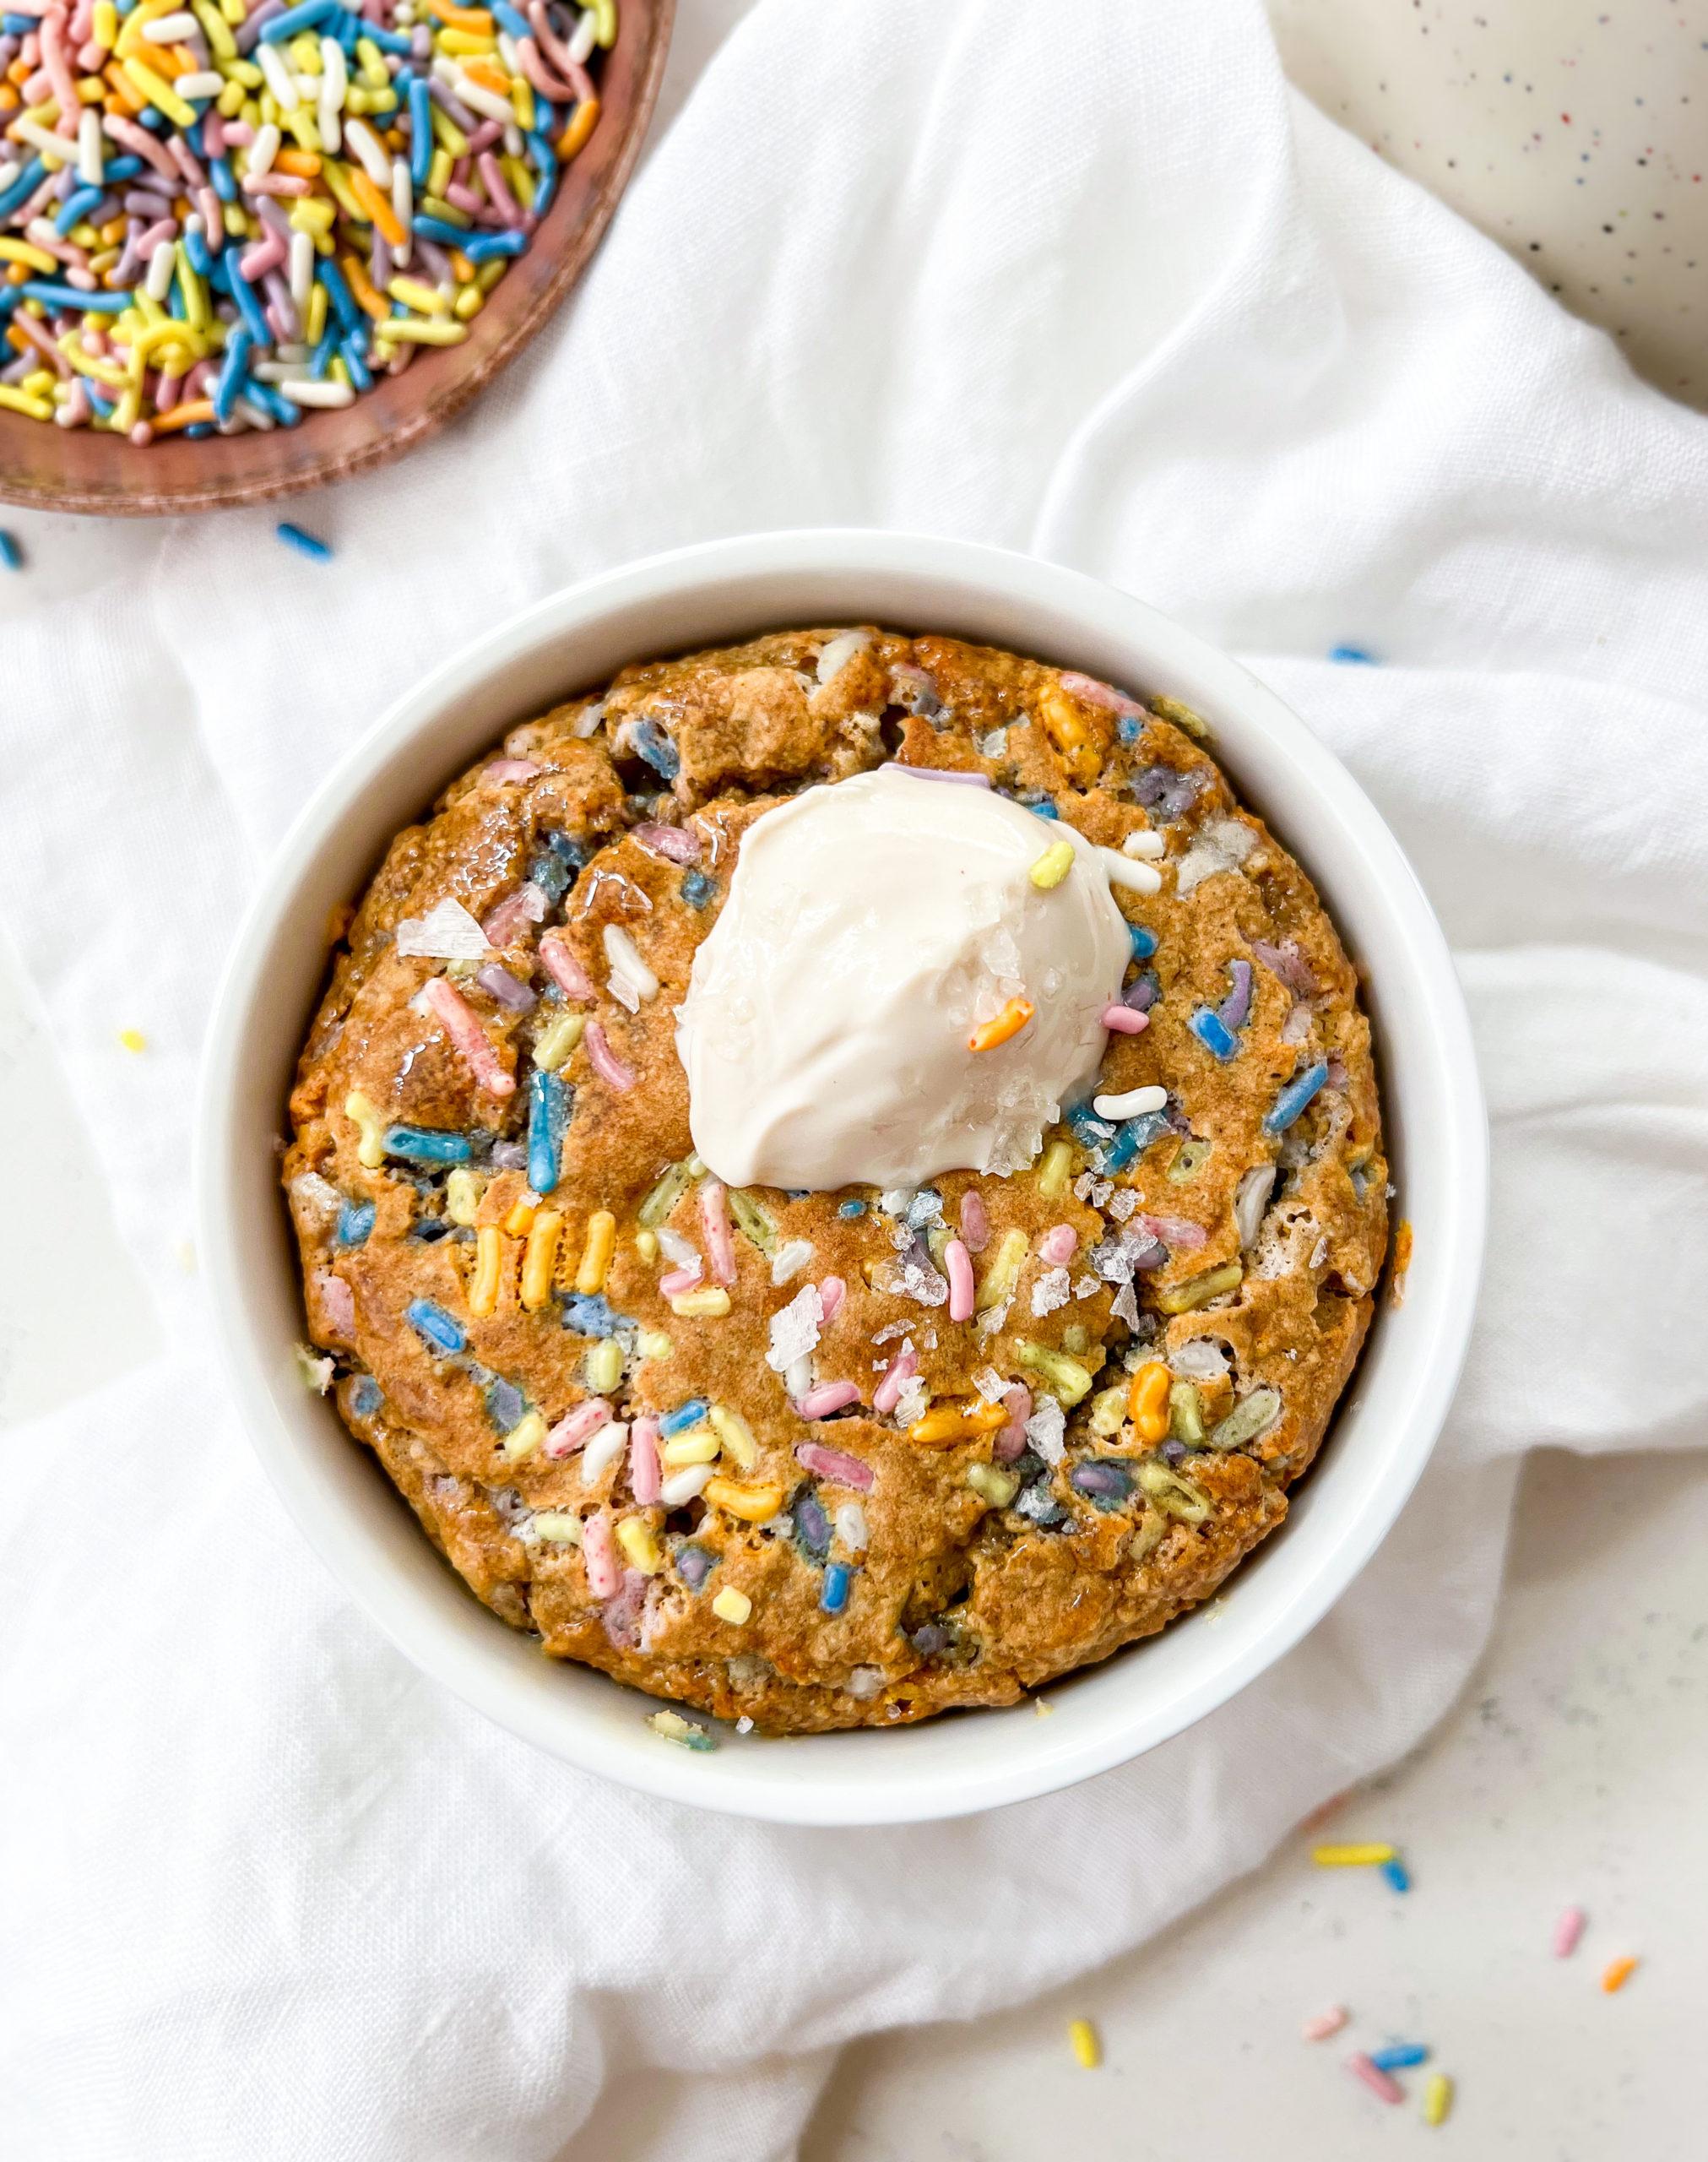 baked oats in a ramekin next to a bowl of sprinkles